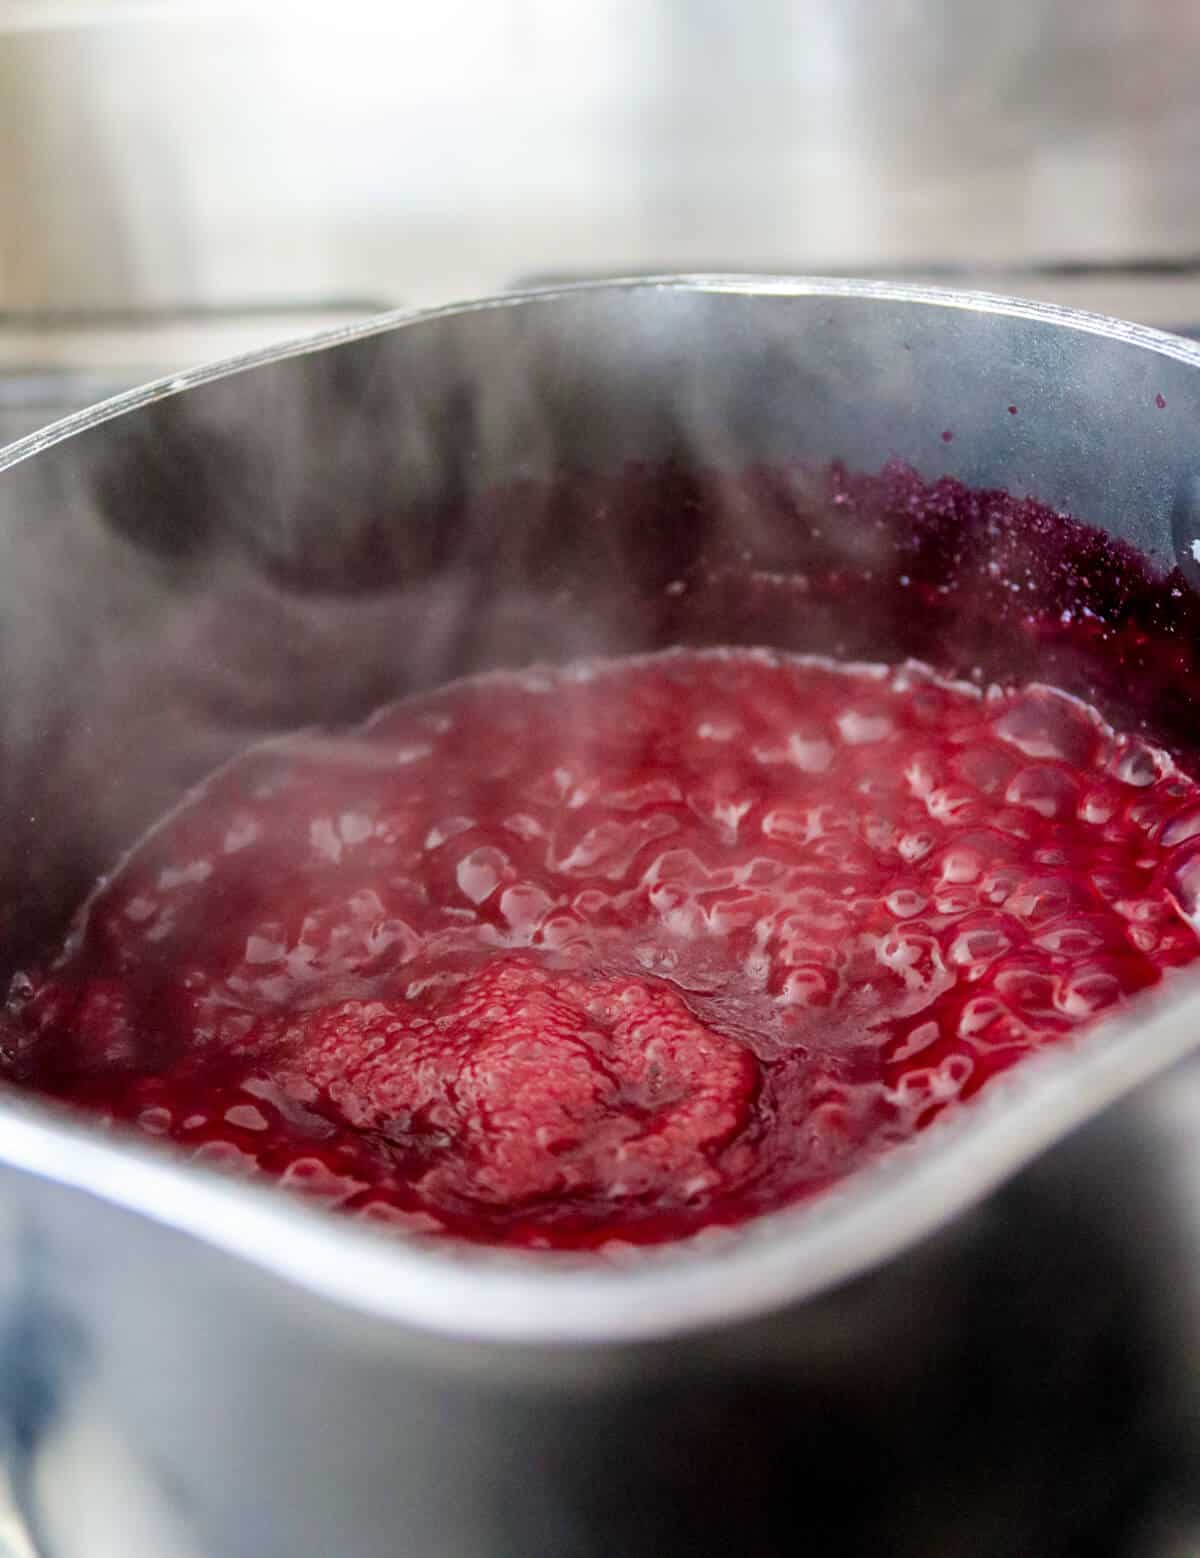 Blueberry puree bubbling in a saucepan.